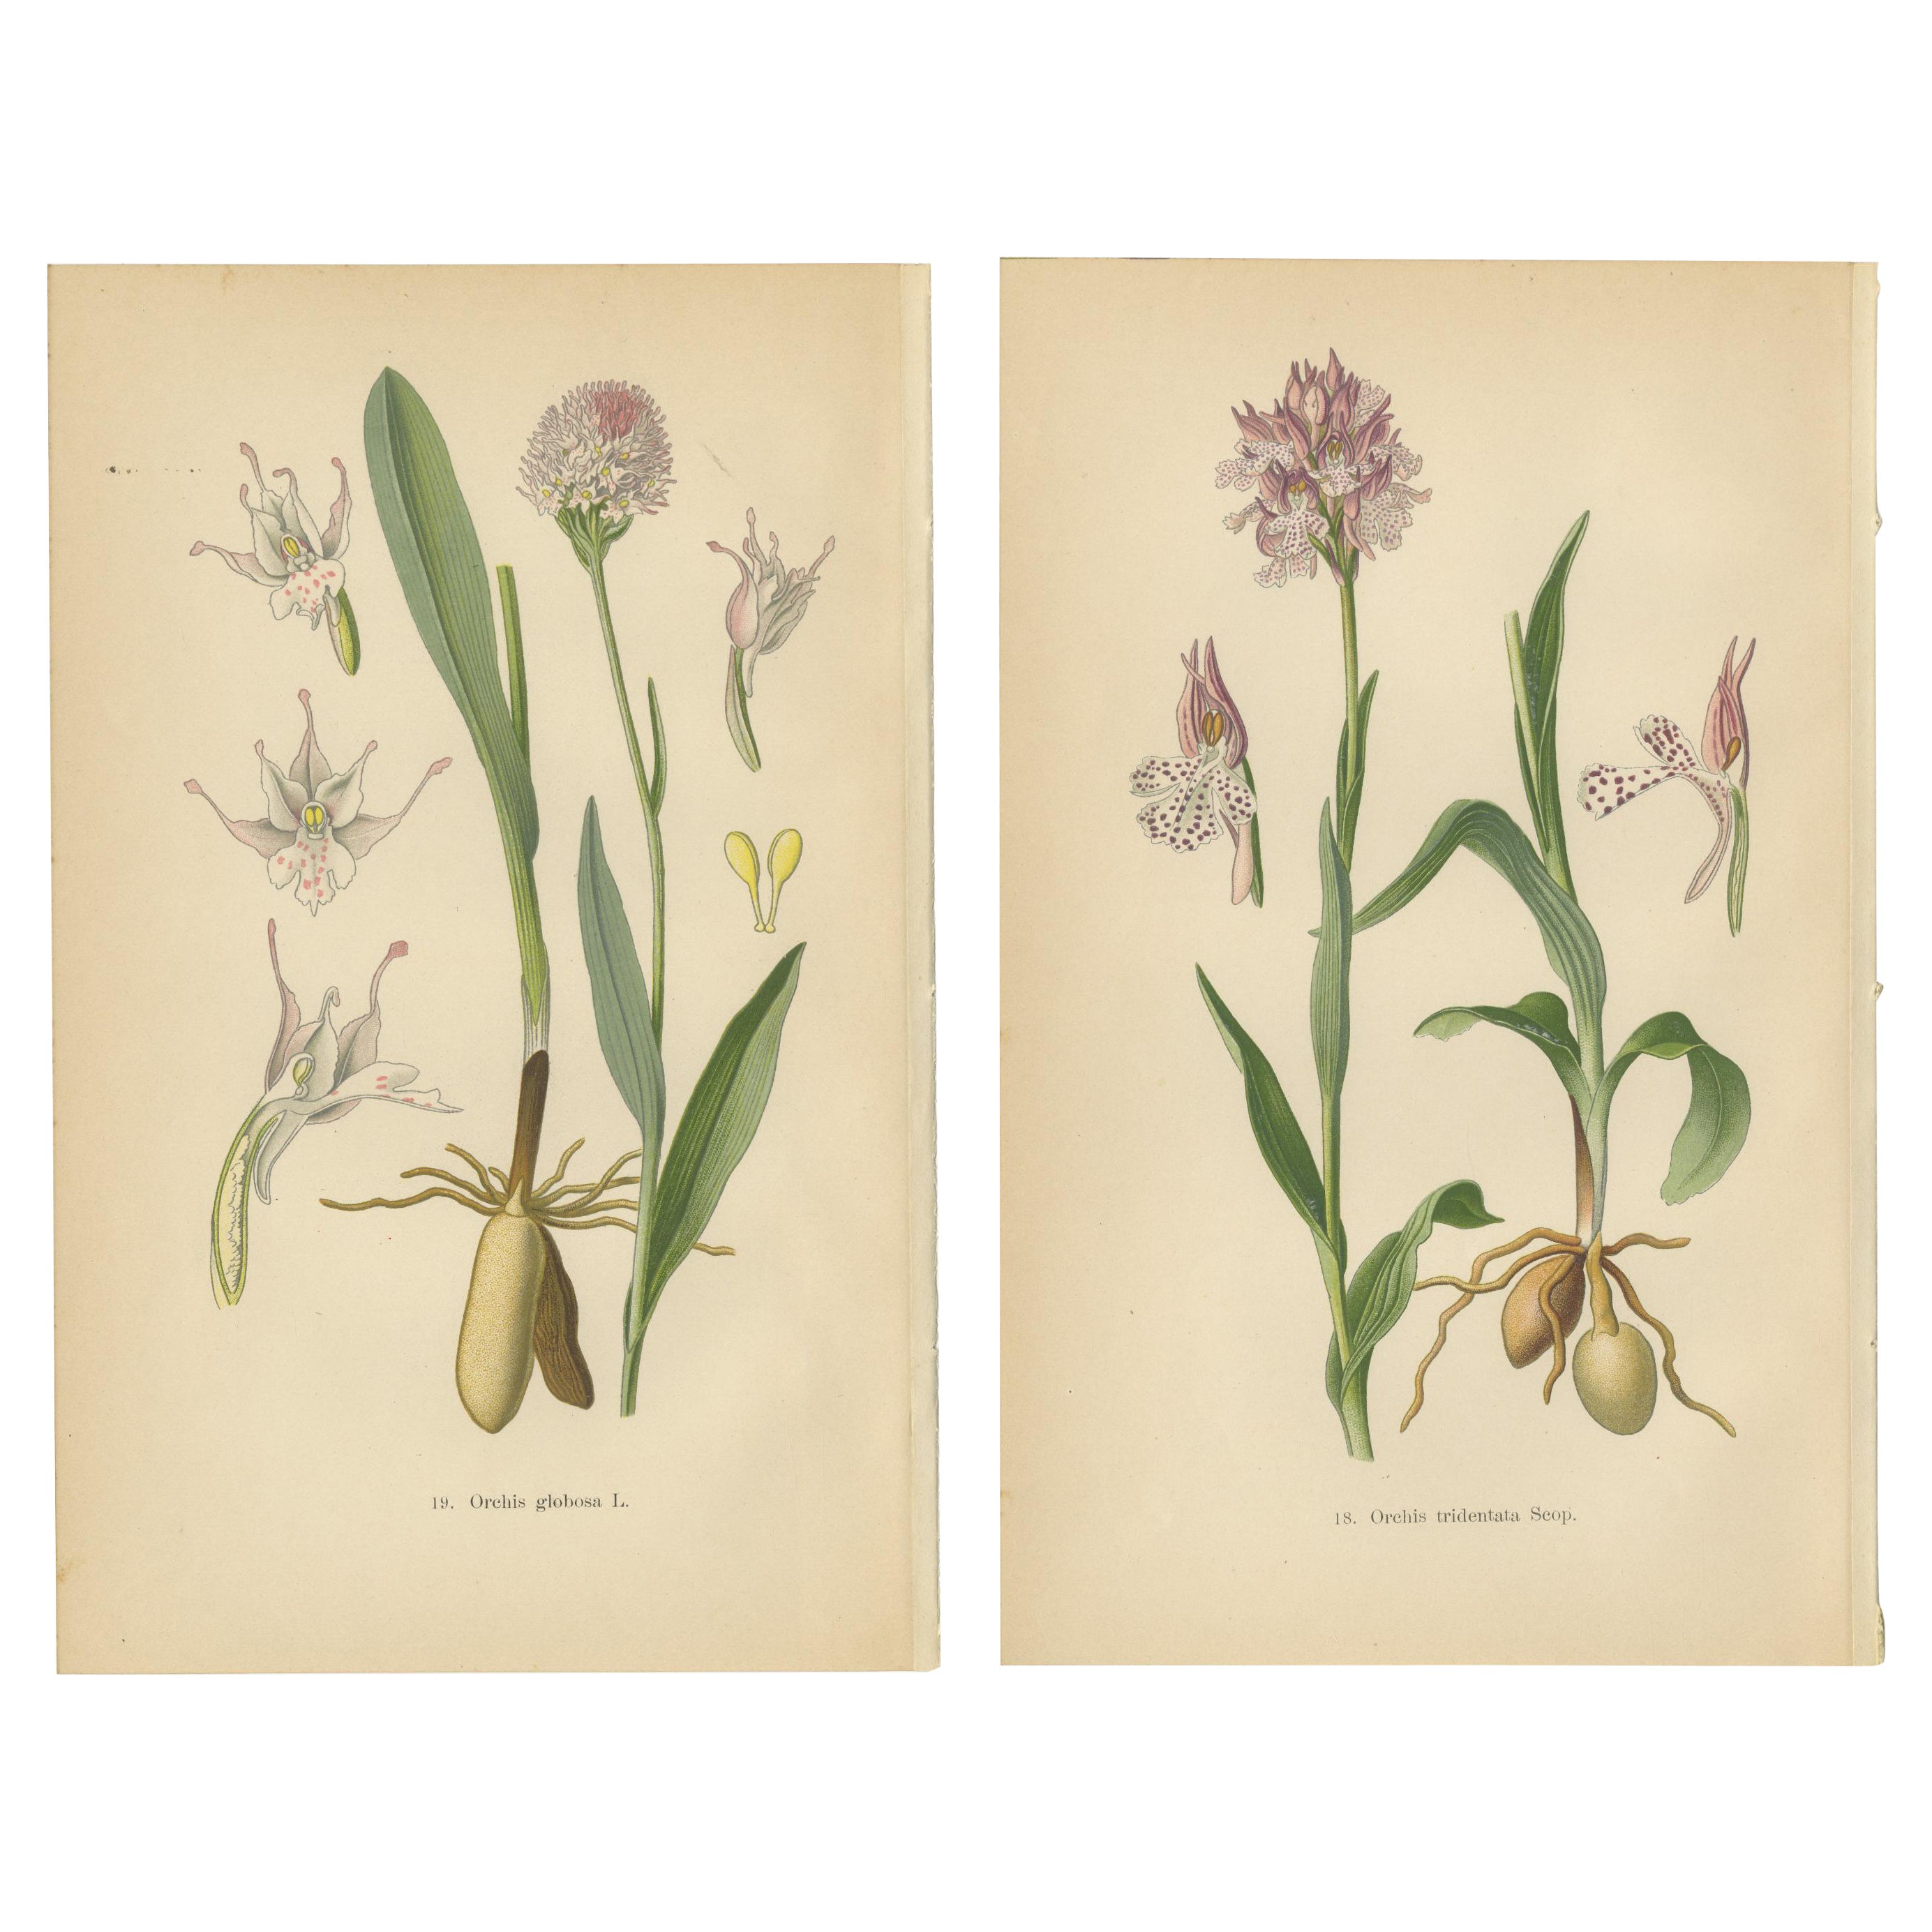 Historical Flora: Orchids of 1904 in Art and Science